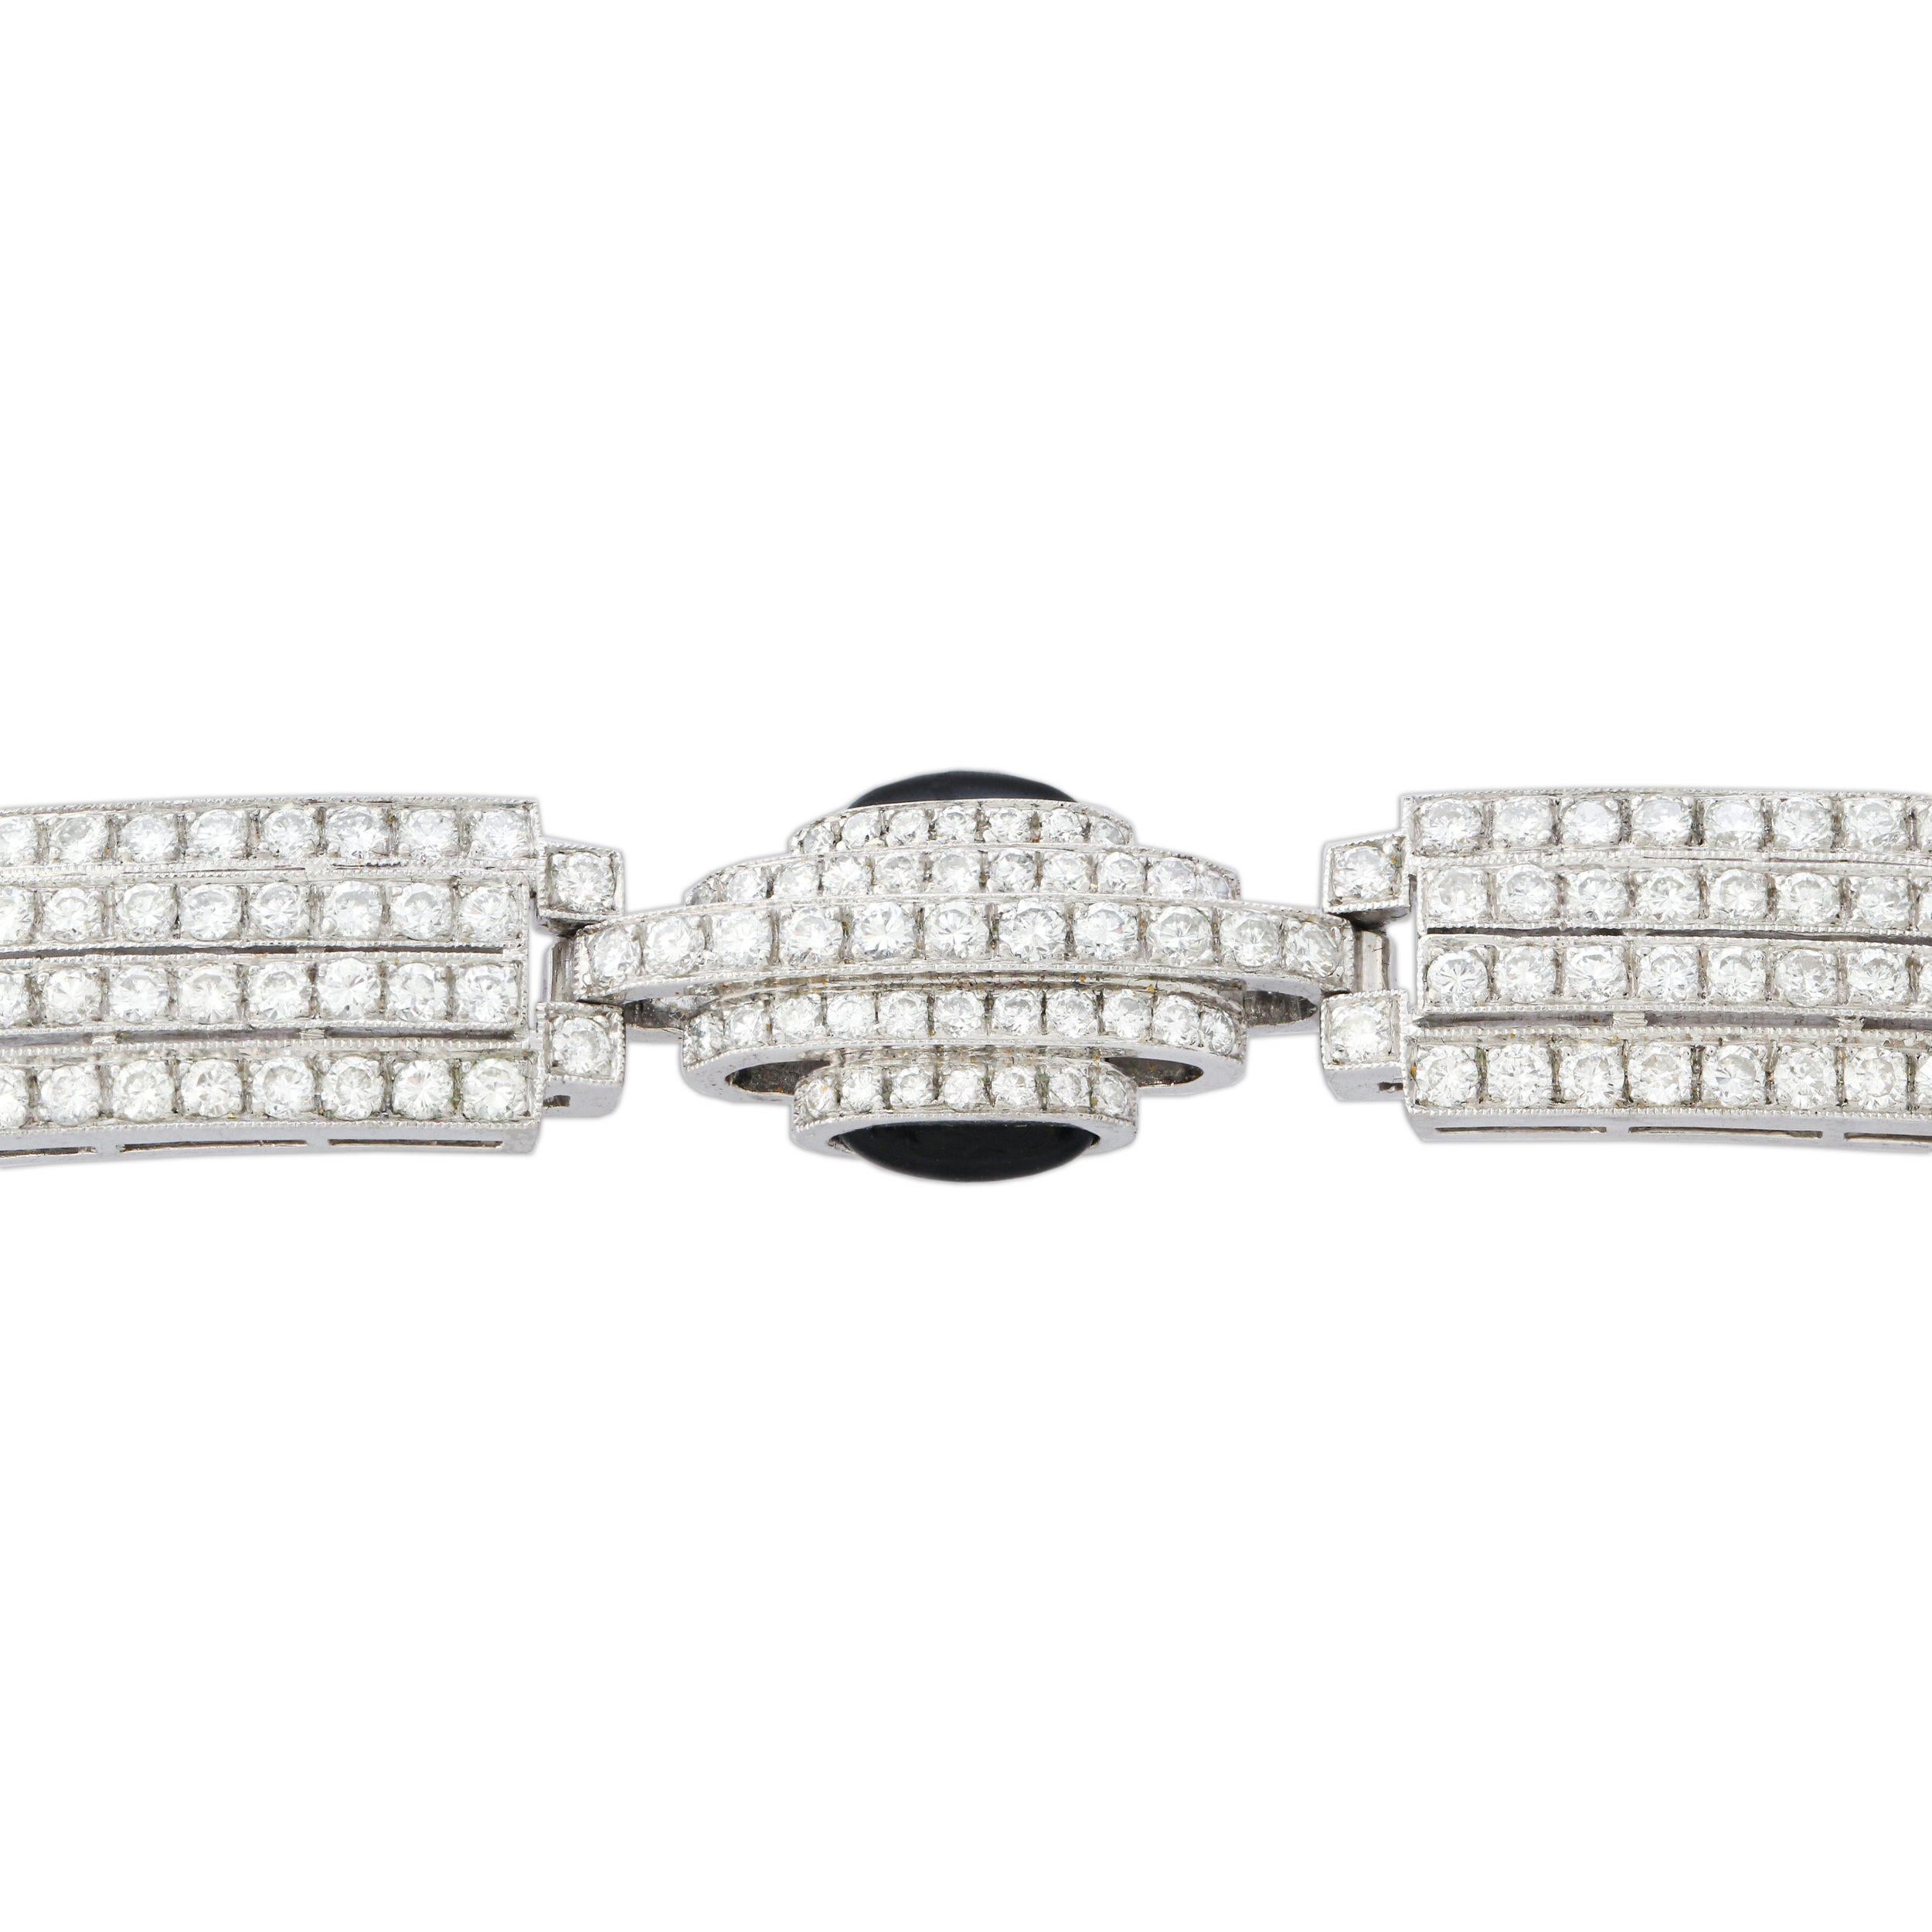 An onyx and diamond line bracelet formed of pavé-set diamond links with onyx details mounted in 18k white gold. Length = 17cm. Circa 1950s